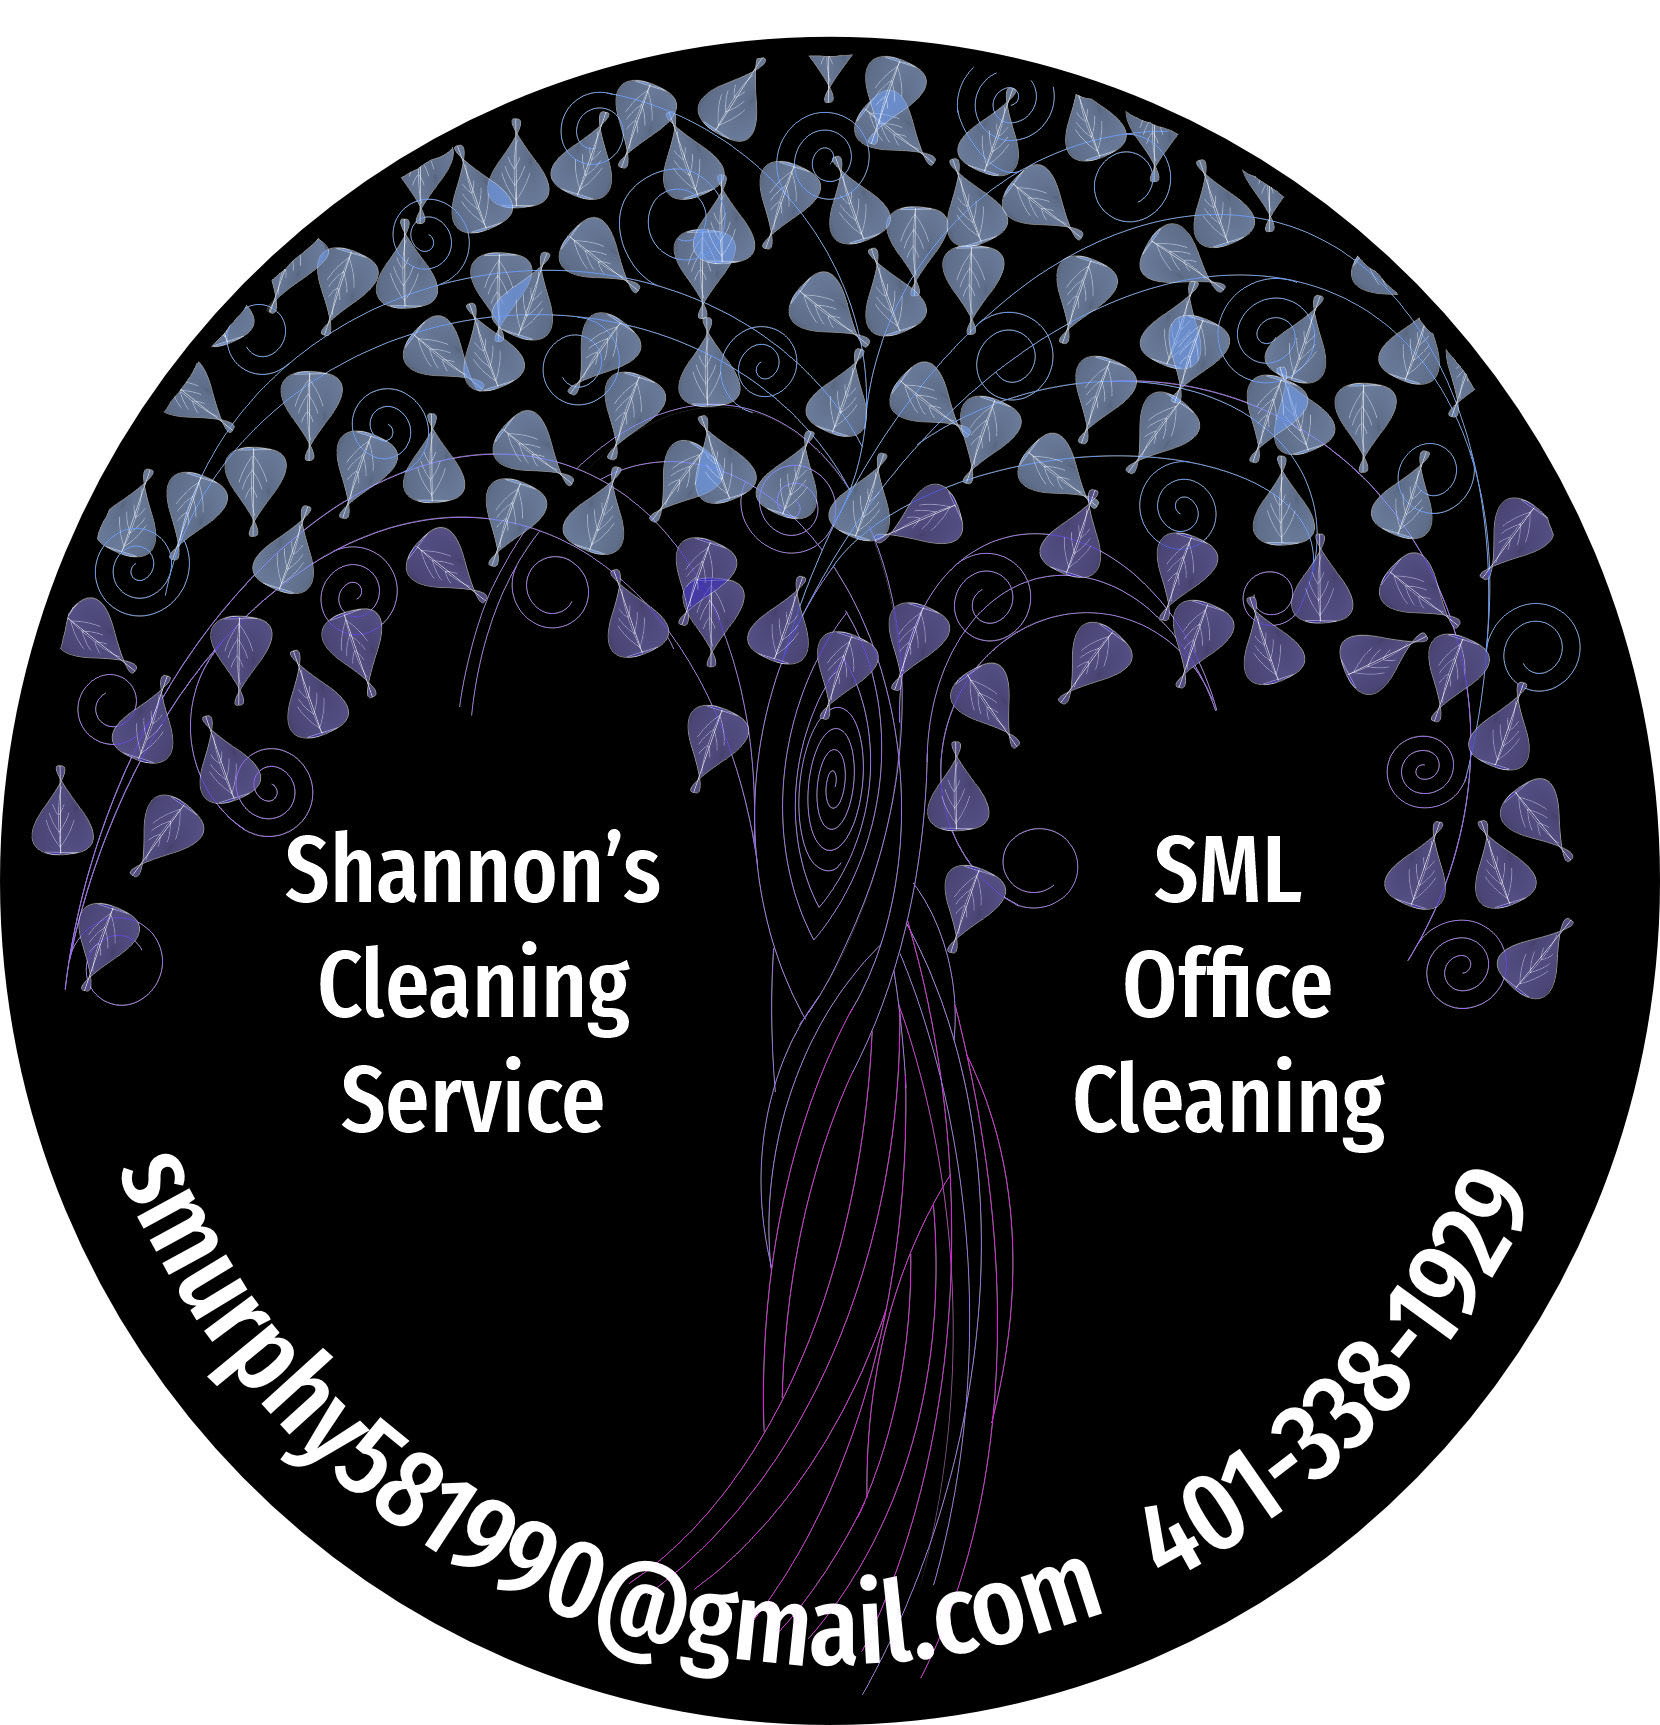 SML Office Cleaning Logo